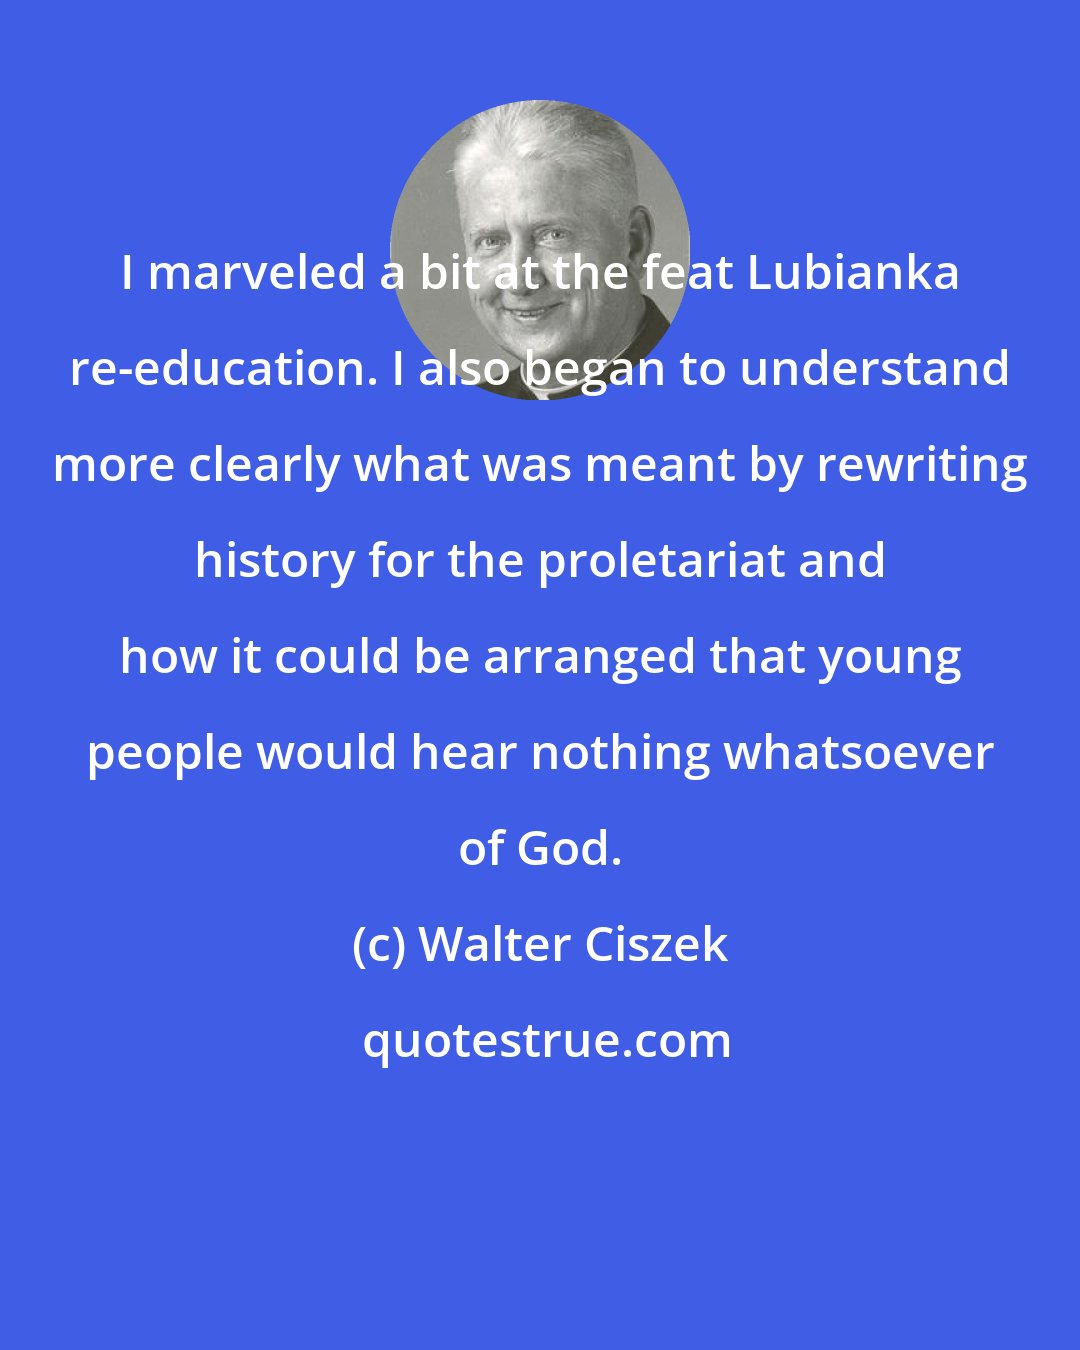 Walter Ciszek: I marveled a bit at the feat Lubianka re-education. I also began to understand more clearly what was meant by rewriting history for the proletariat and how it could be arranged that young people would hear nothing whatsoever of God.